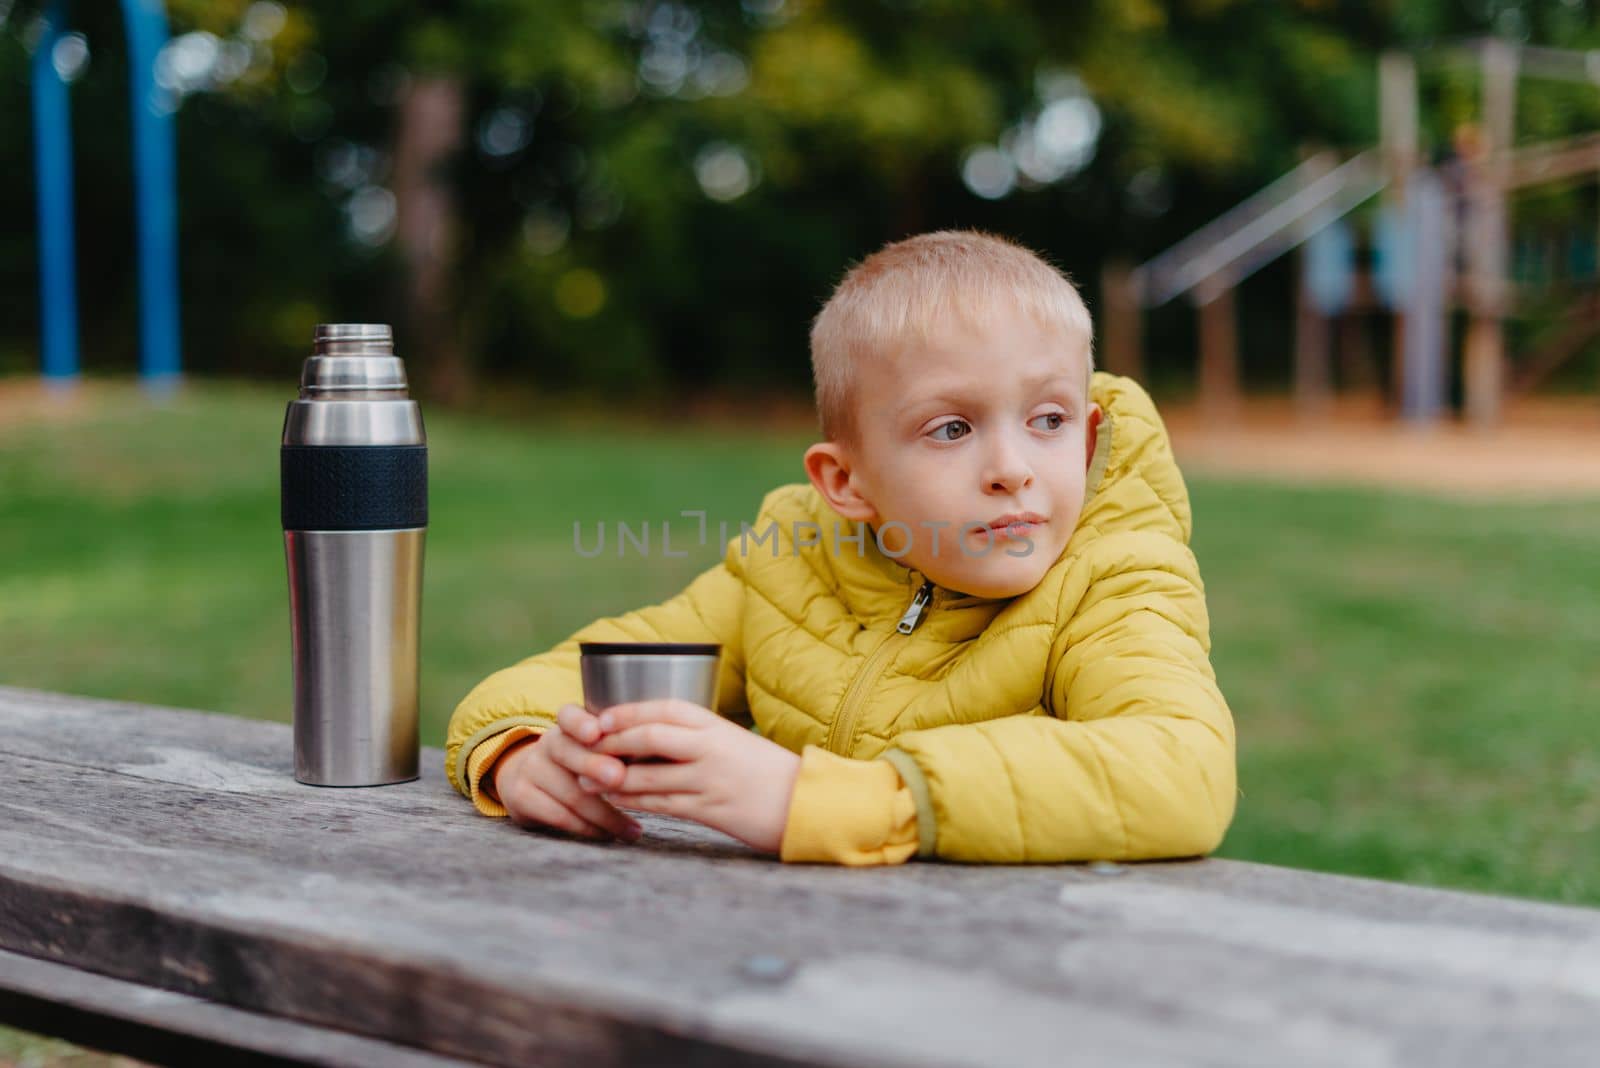 Boy is sitting at wooden table with thermos and cup of tea and looking into distance. A boy sits at a table in the park in the fall season. Child Boy Son In Autumn Park, Sitting On Wooden Bench And Table. Little Kid Outdoors. by Andrii_Ko